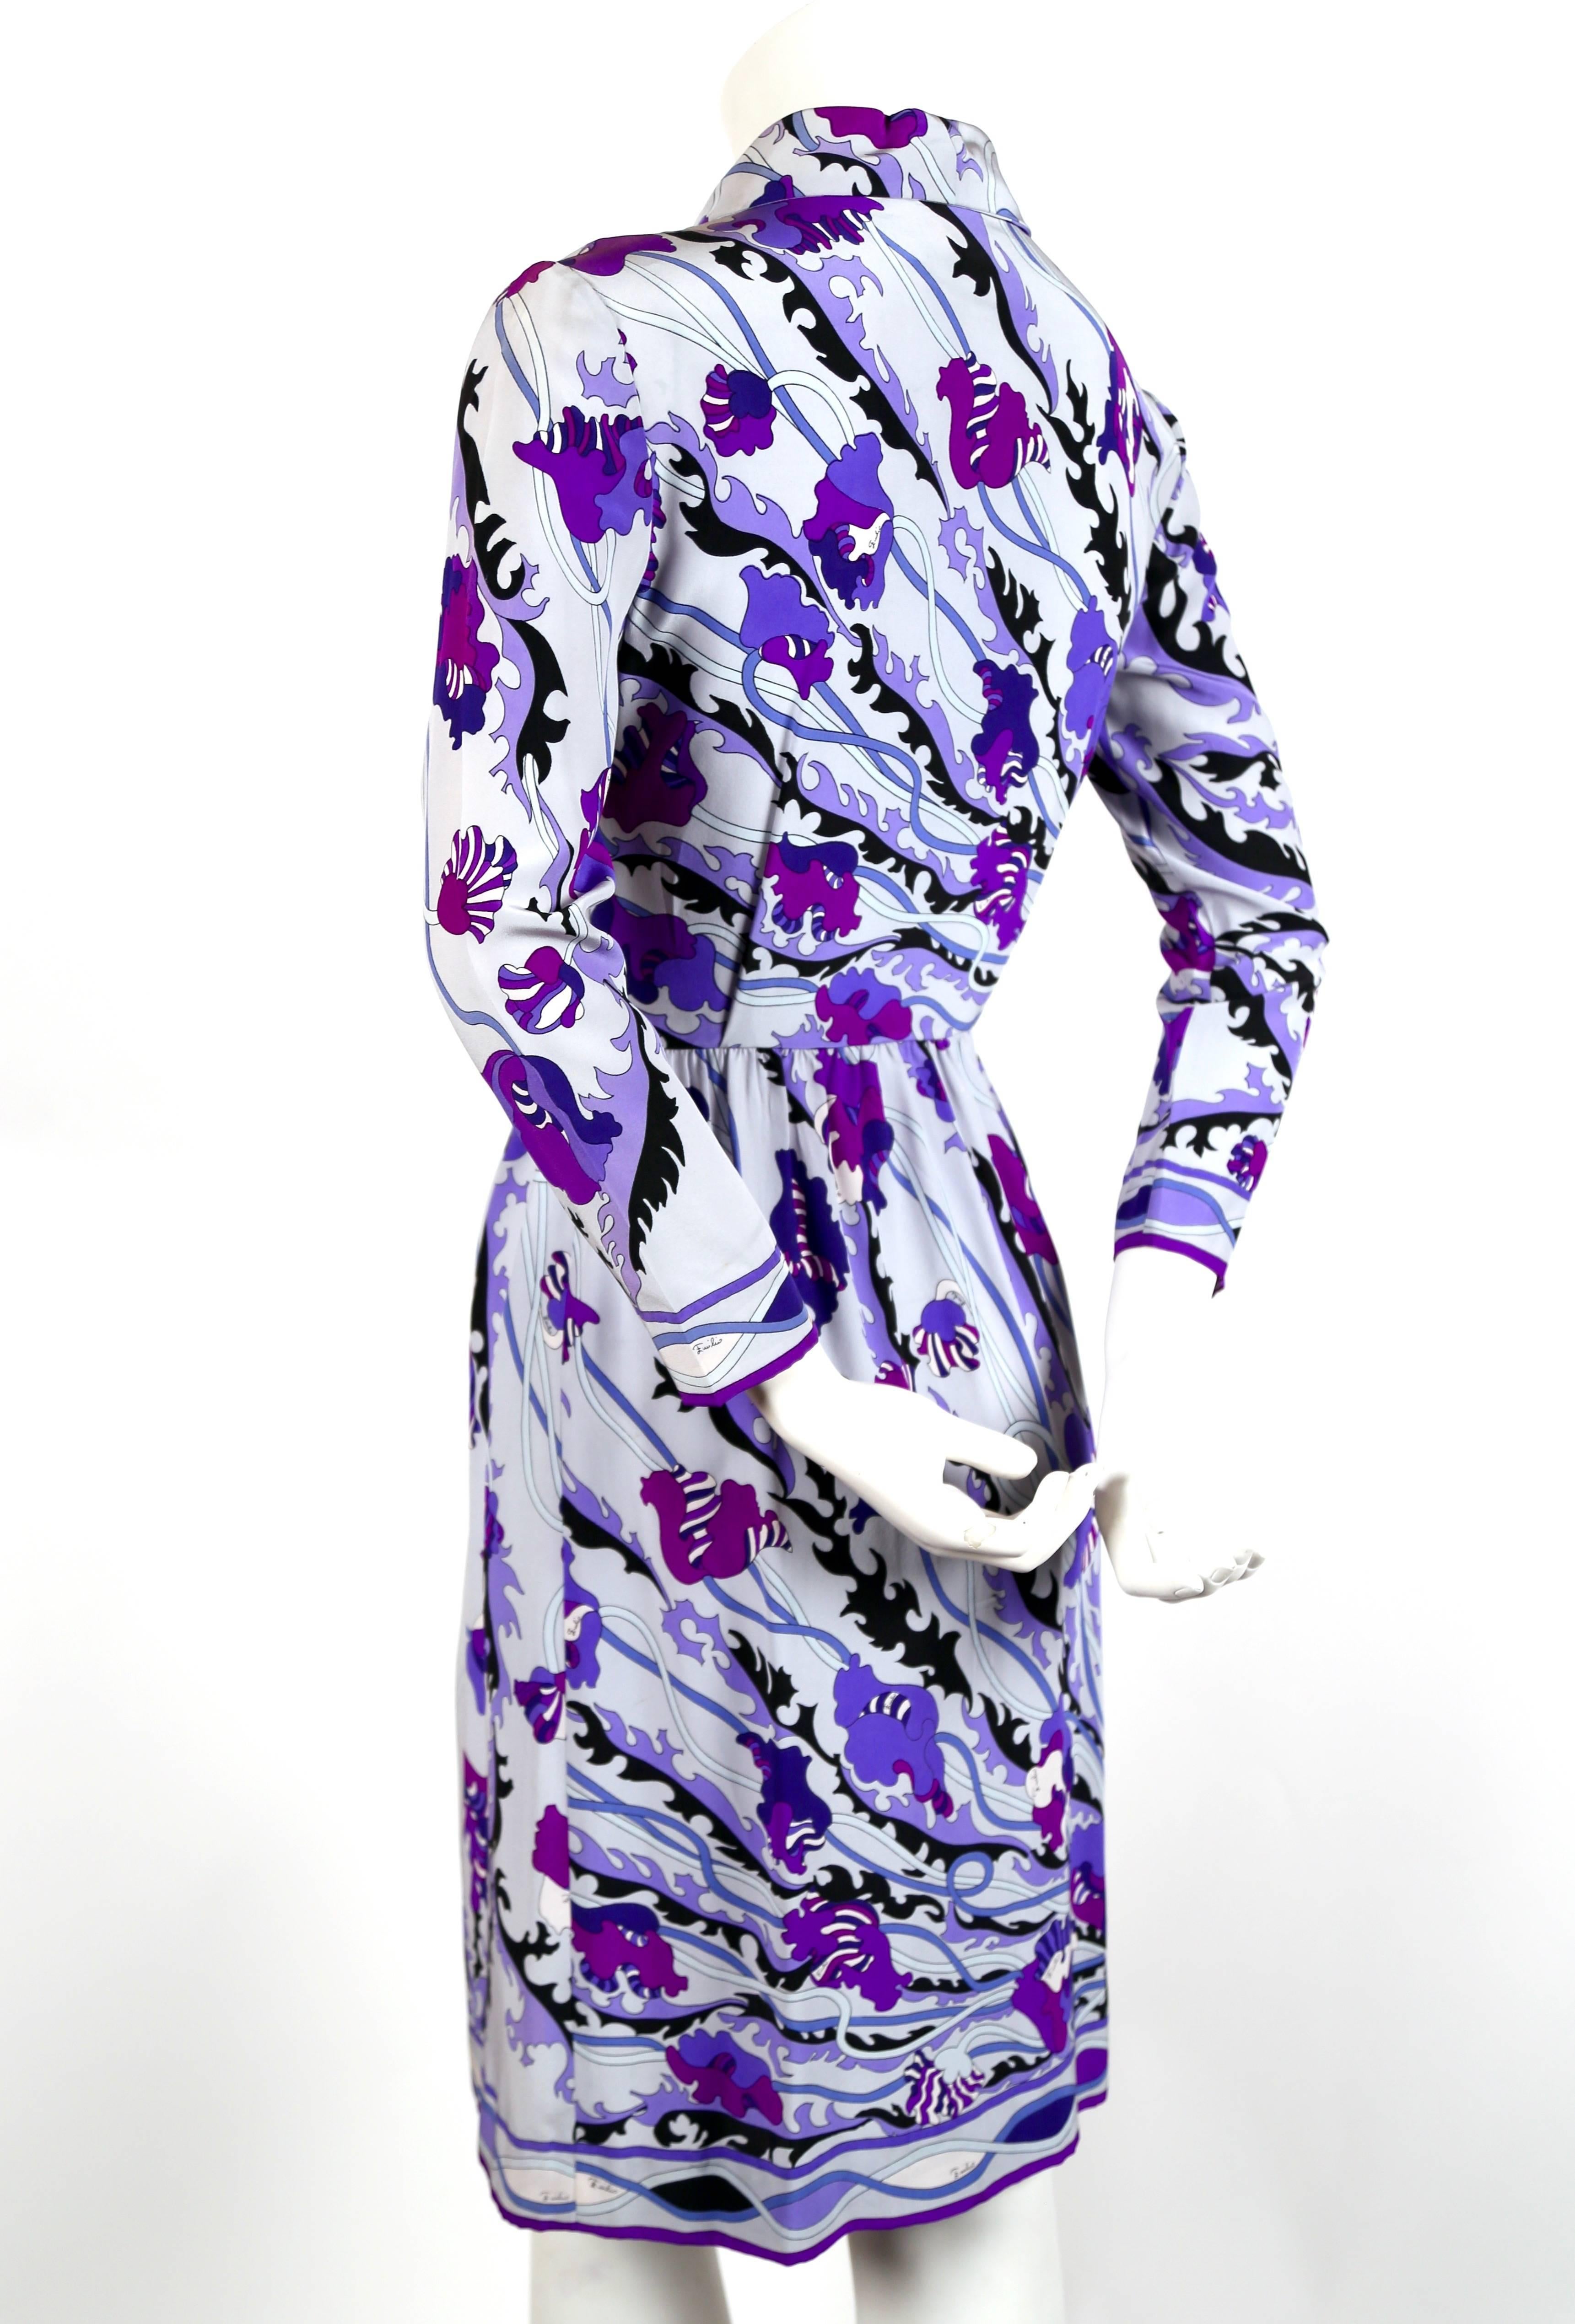 Vibrant EMILIO PUCCI floral printed silk dress dating to the 1960's. Beautiful color scheme of blues and purples with black accents. Snap closure at front. Fits a US 2. Bust measures approximately 34